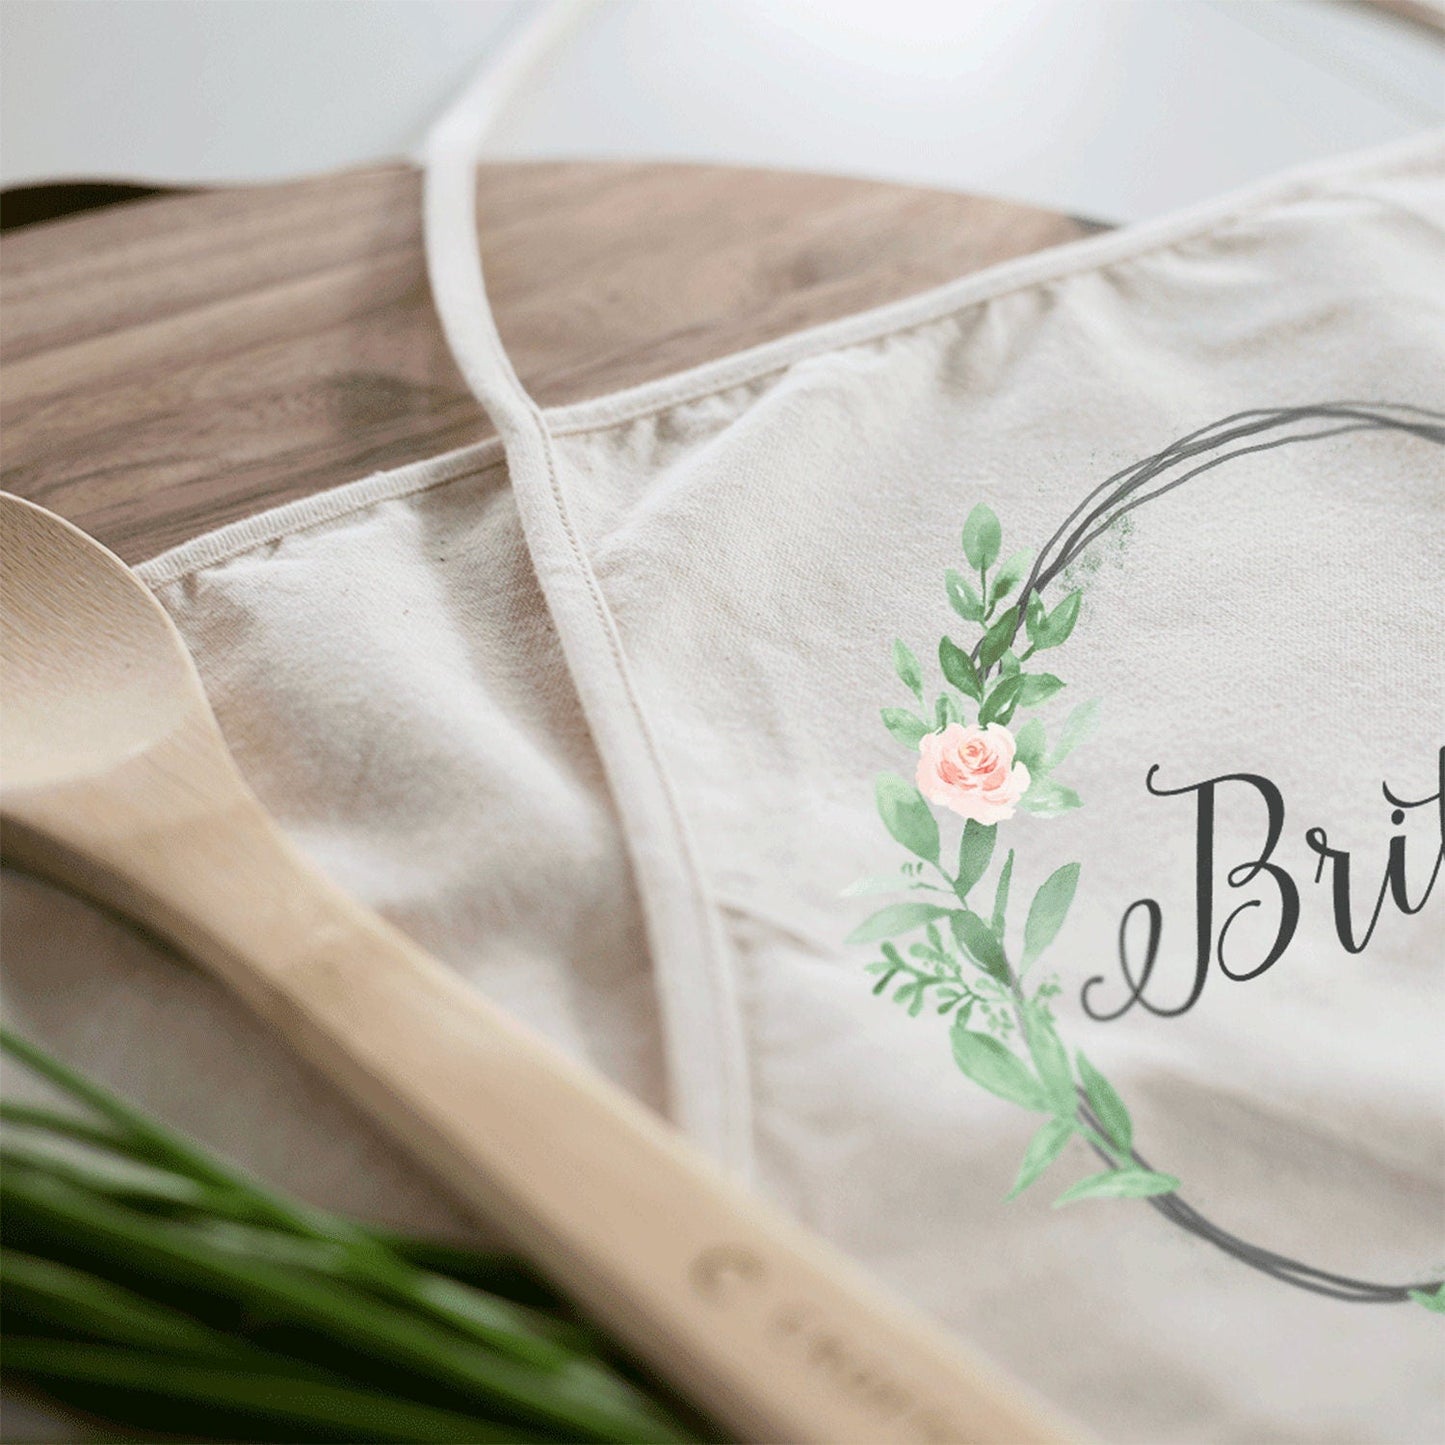 Load image into Gallery viewer, Personalized Baby Blue Floral Wreath Apron With Name | Kitchen Apron | Custom Apron | Baby Blue Floral Wreath | Custom Monogram Apron
